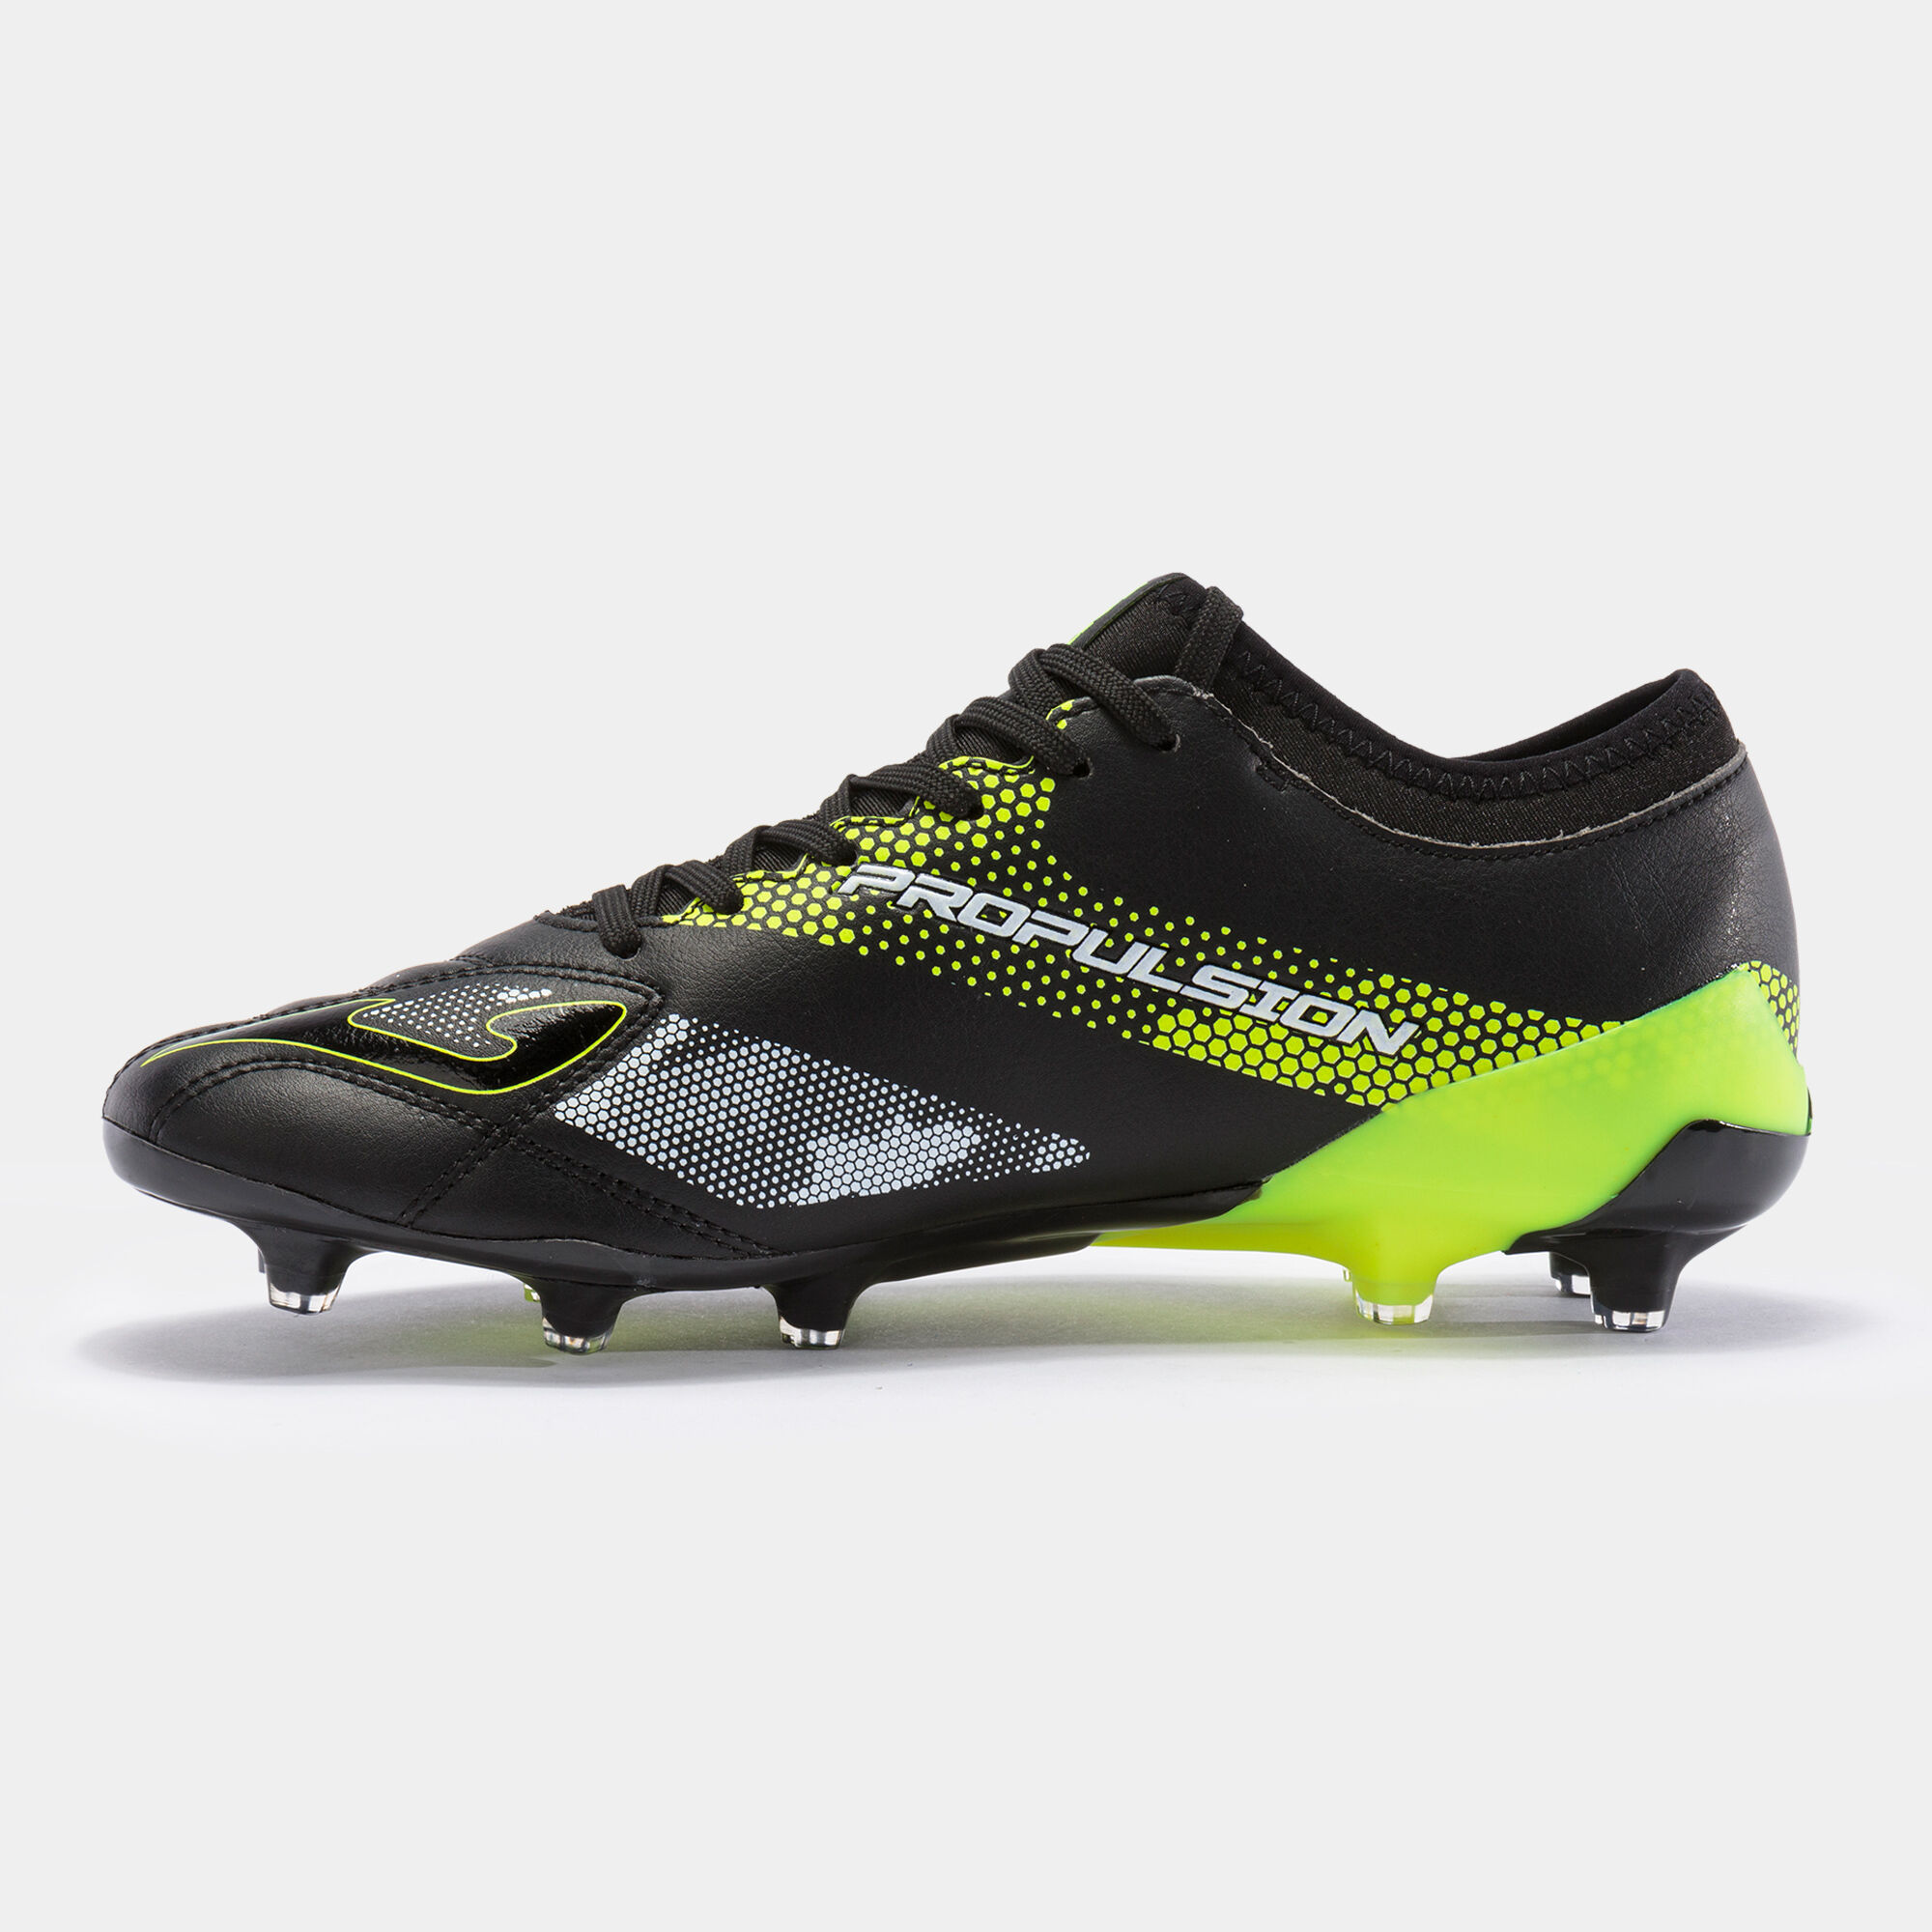 FOOTBALL BOOTS PROPULSION CUP 21 FIRM GROUND FG BLACK FLUORESCENT YELLOW